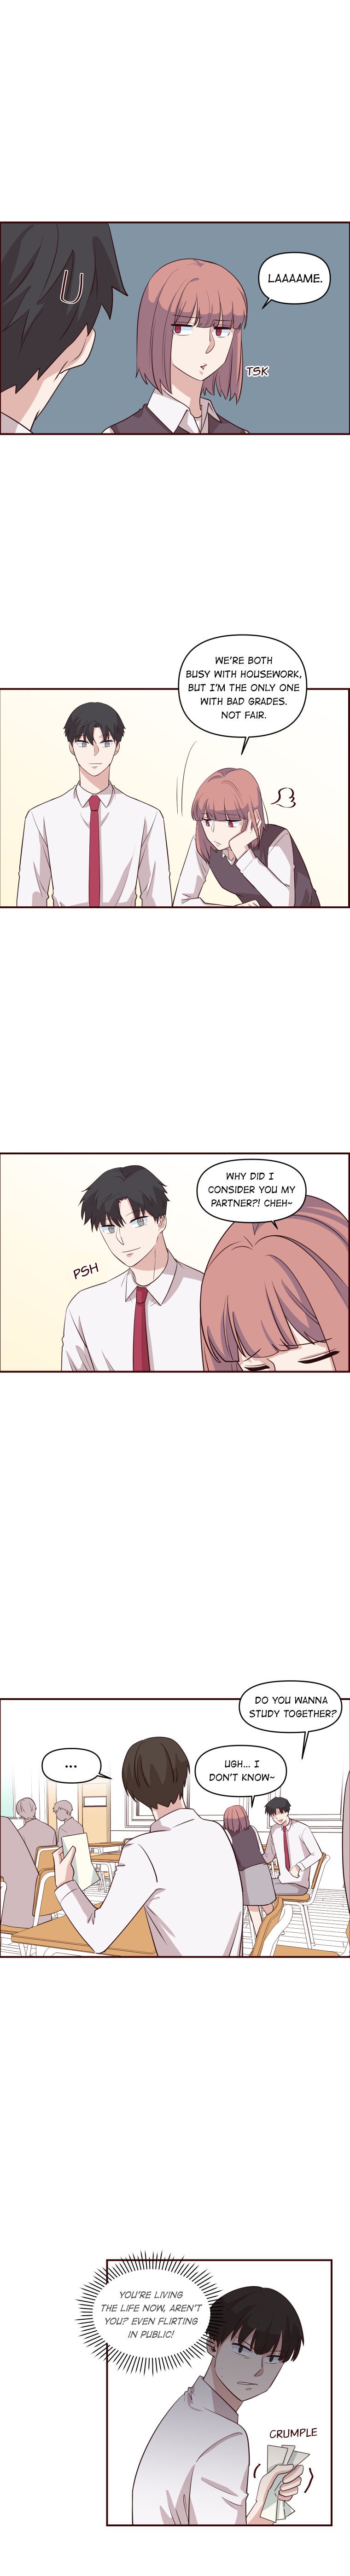 The Housewife vol.1 ch.21